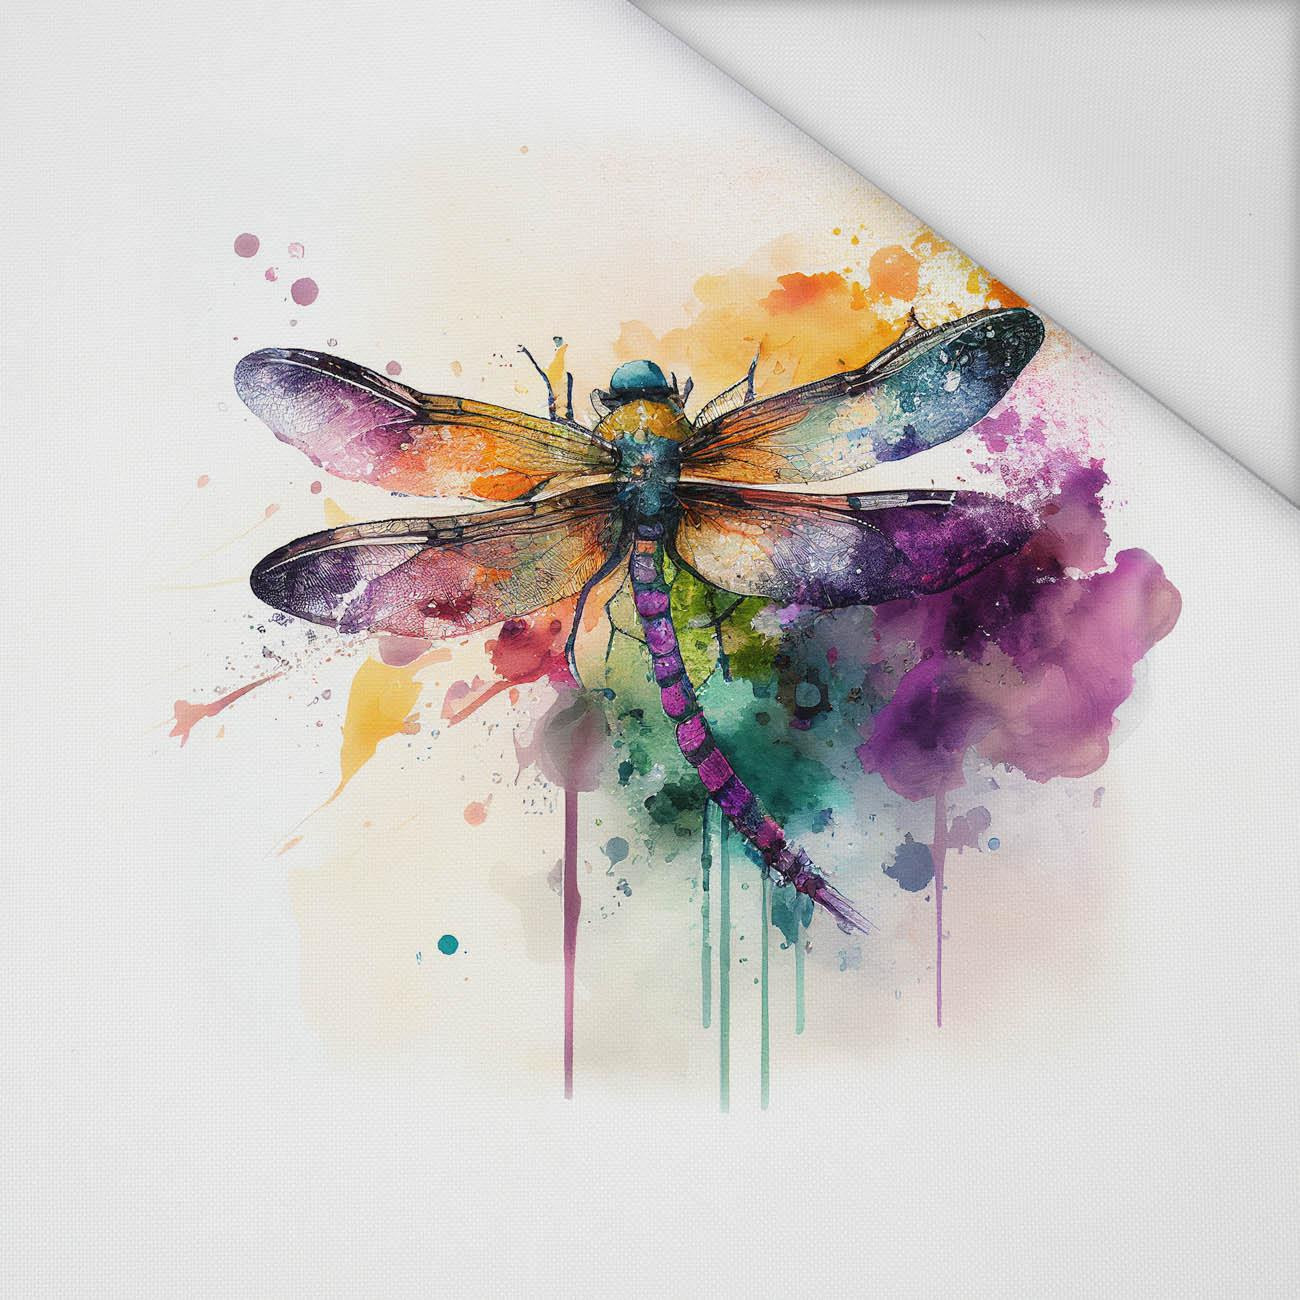 WATERCOLOR DRAGONFLY - panel (75cm x 80cm) Waterproof woven fabric